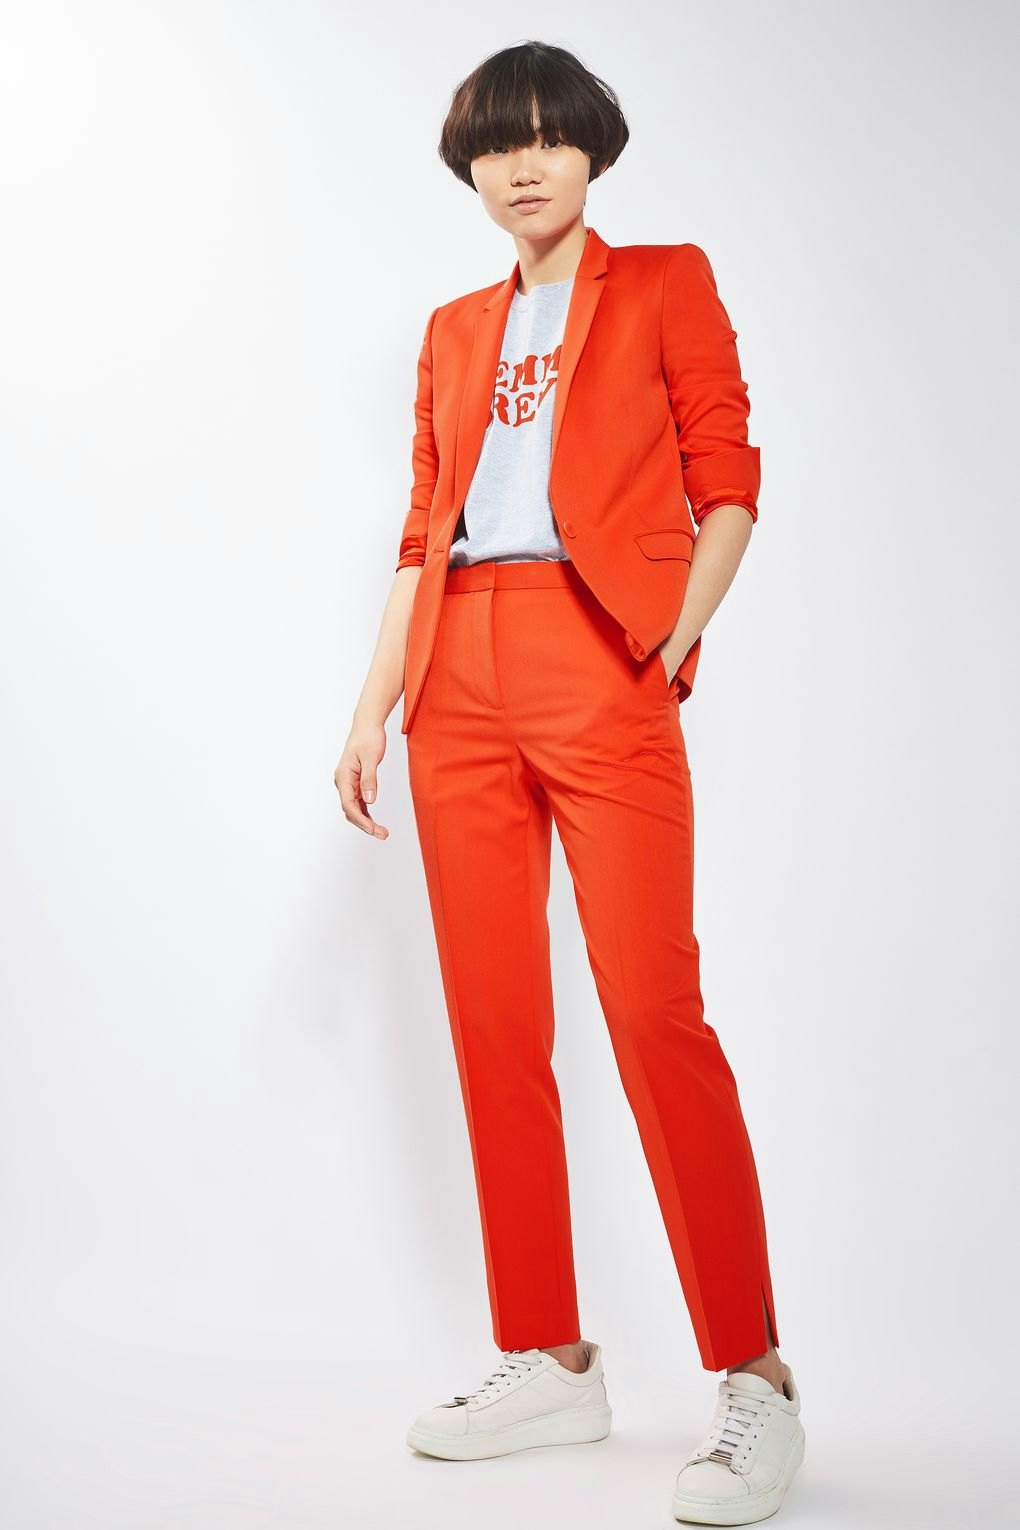 red trouser suits for ladies